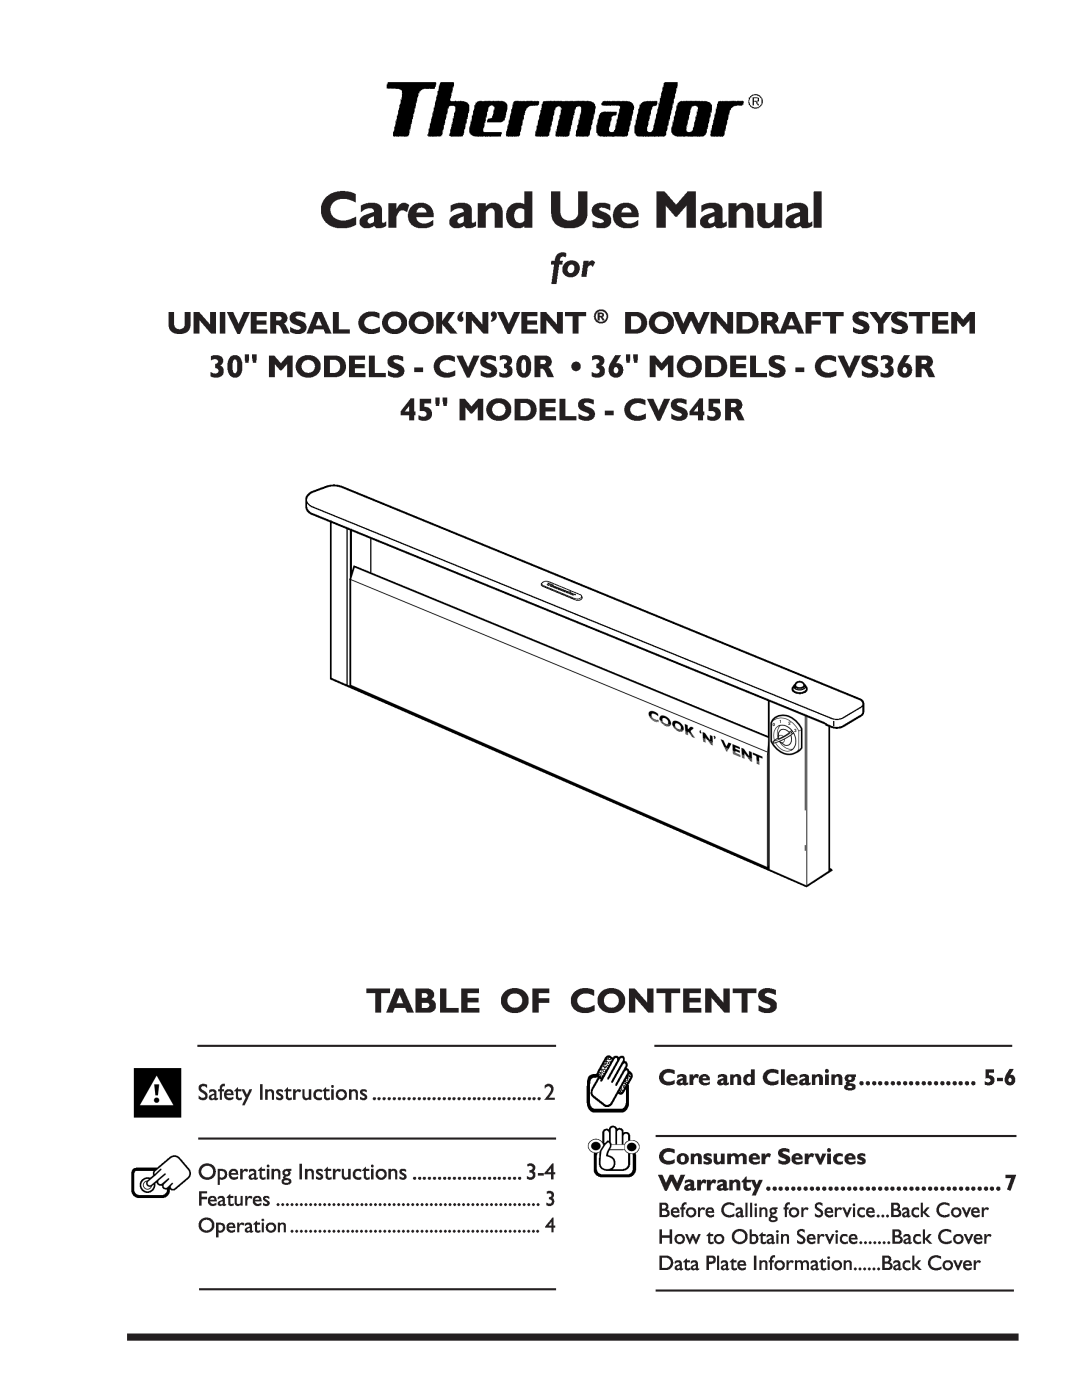 Thermador CVS30R warranty Warranty, Care and Cleaning, Consumer Services, Back Cover, Care and Use Manual, MODELS - CVS45R 